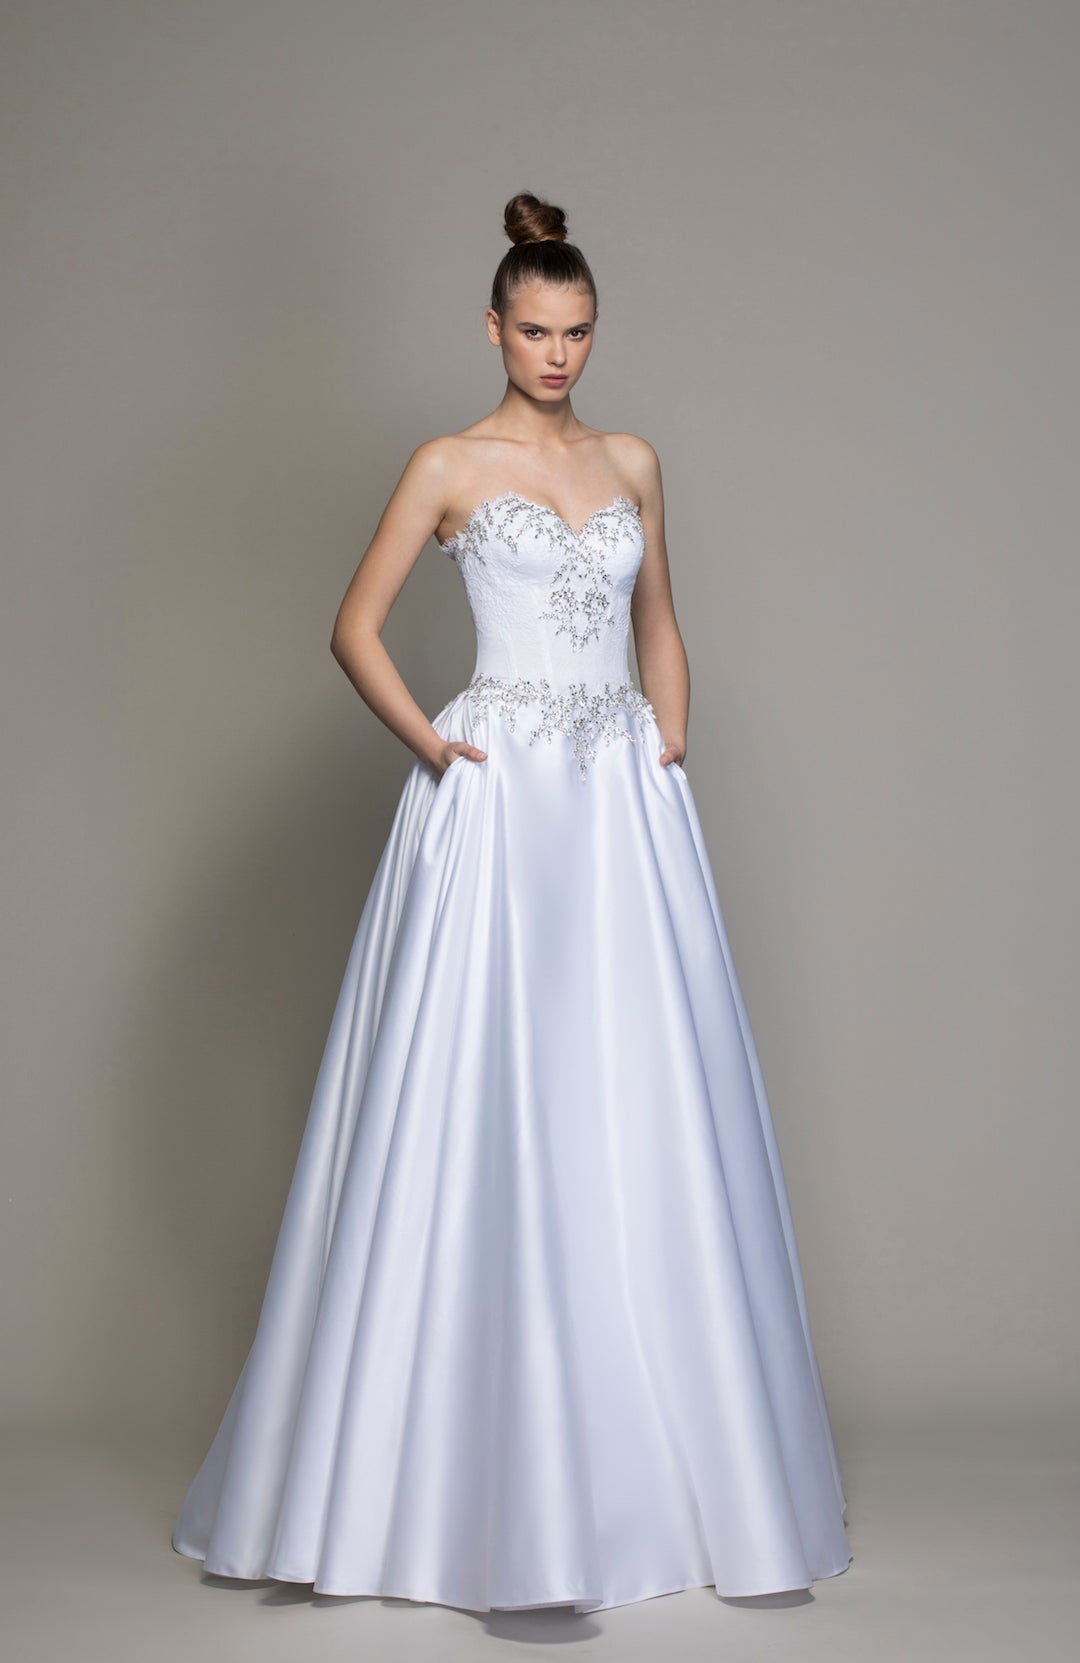 Pnina Tornai's new LOVE 2020 Collection is out! This is style 14772